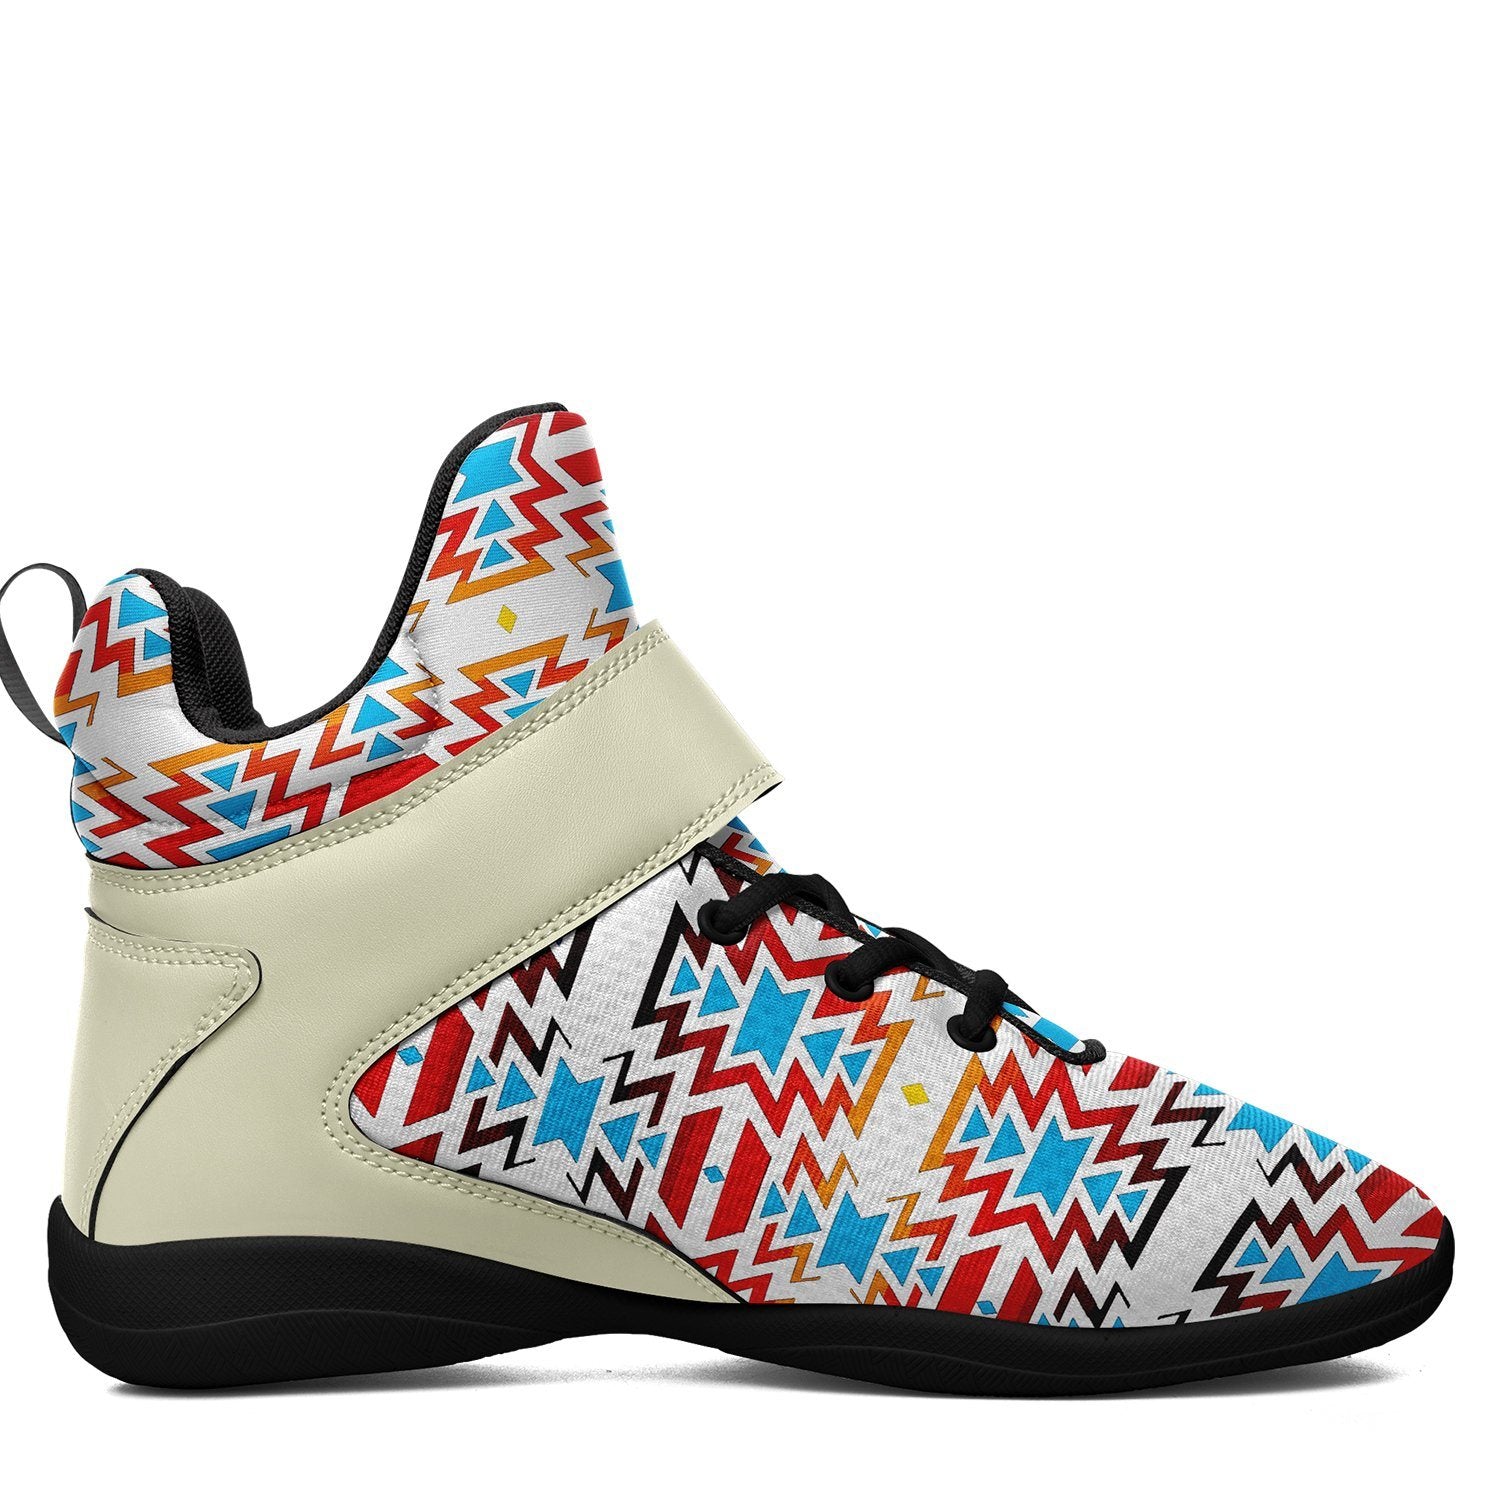 Fire Colors and Sky Ipottaa Basketball / Sport High Top Shoes 49 Dzine 